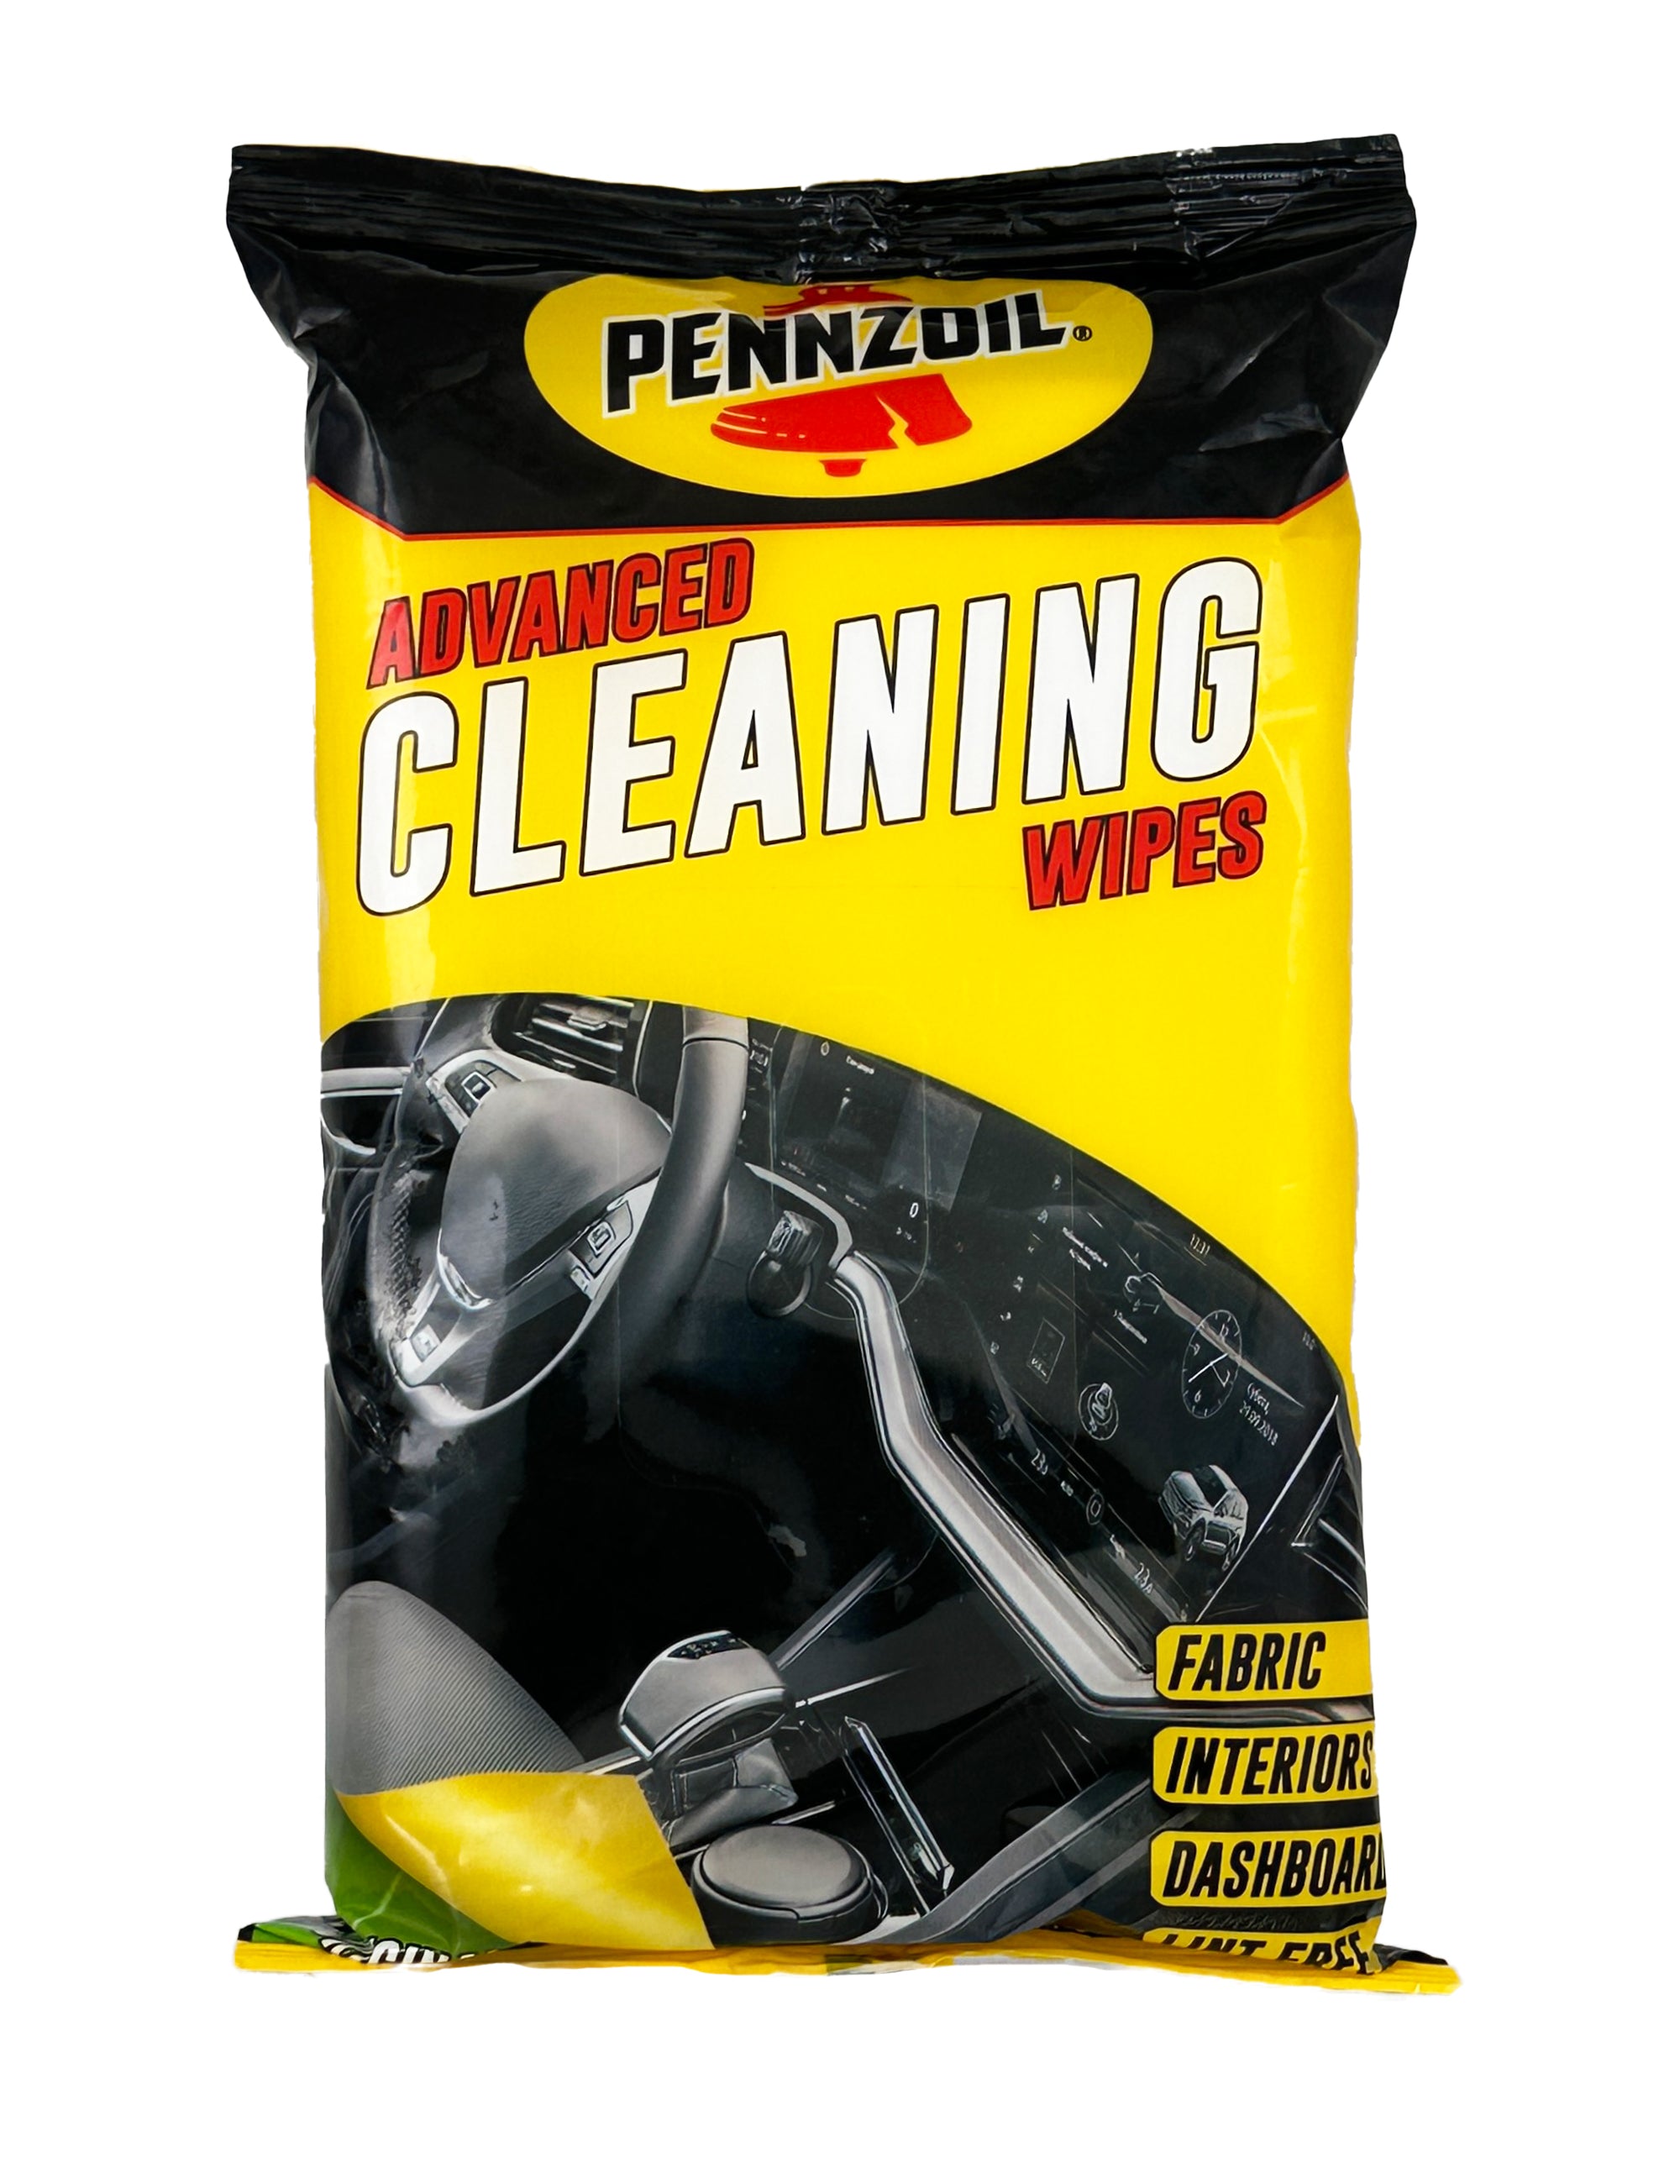 TrexNYC Glass Wipes - Interior Car Wipes, All-In-One Car Wipes